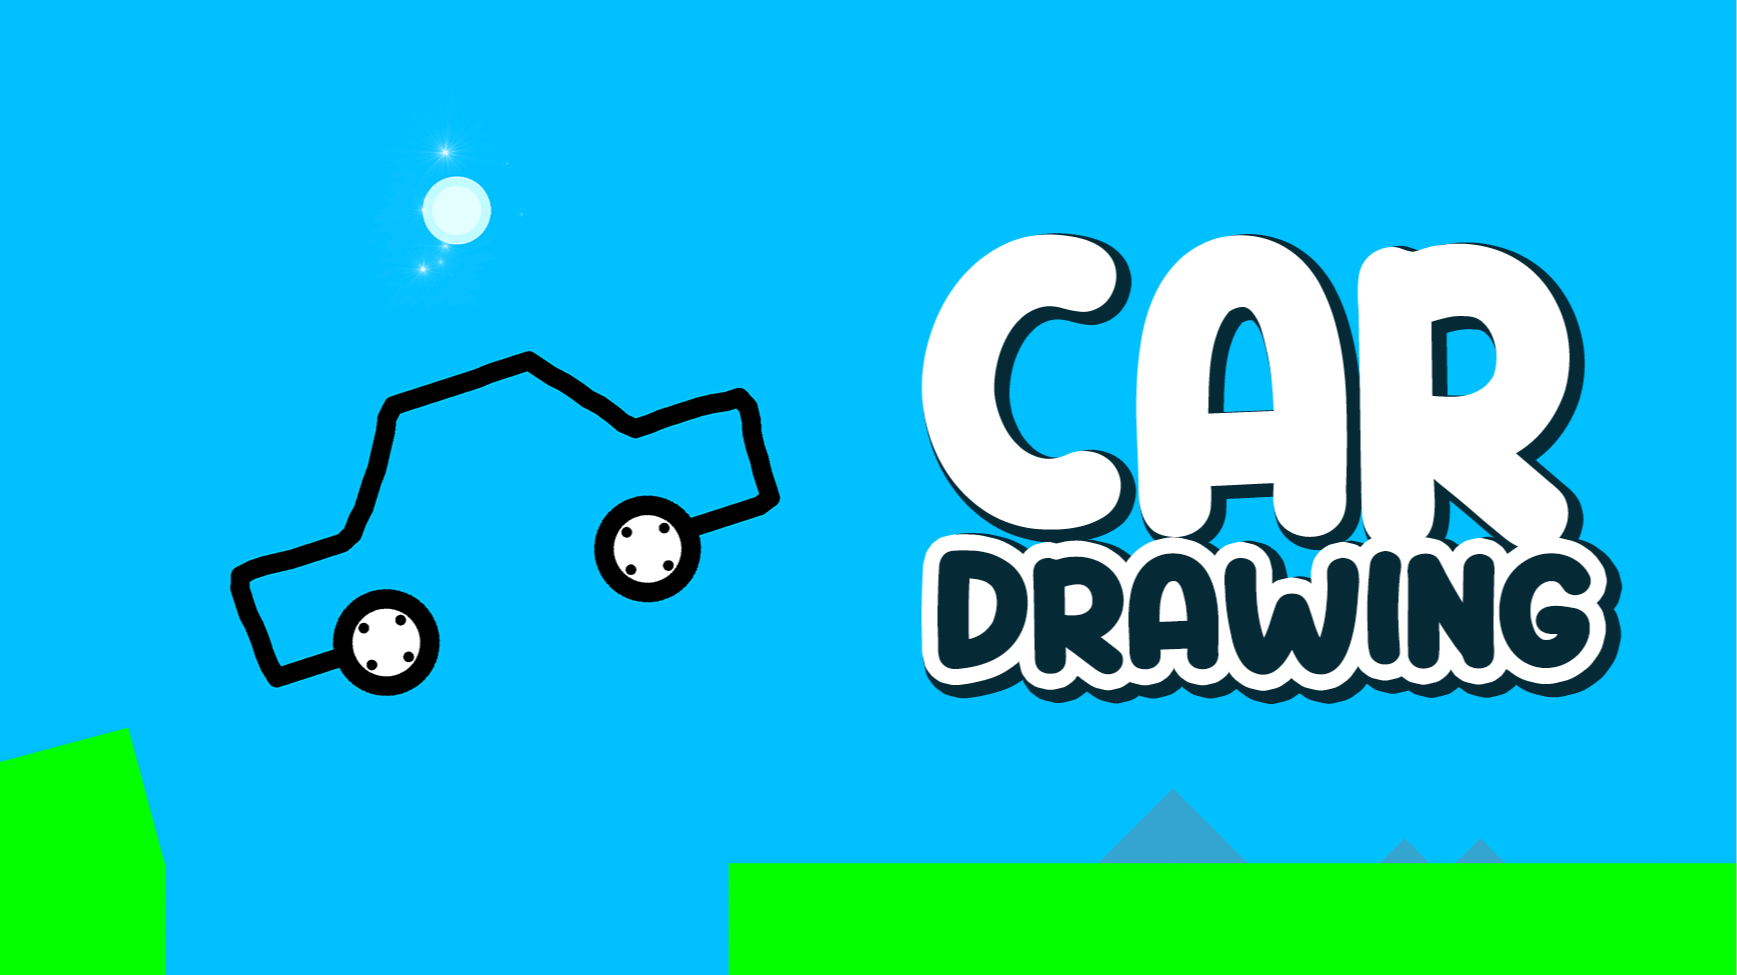 Car Drawing Game ️ Play Car Drawing Game on CrazyGames